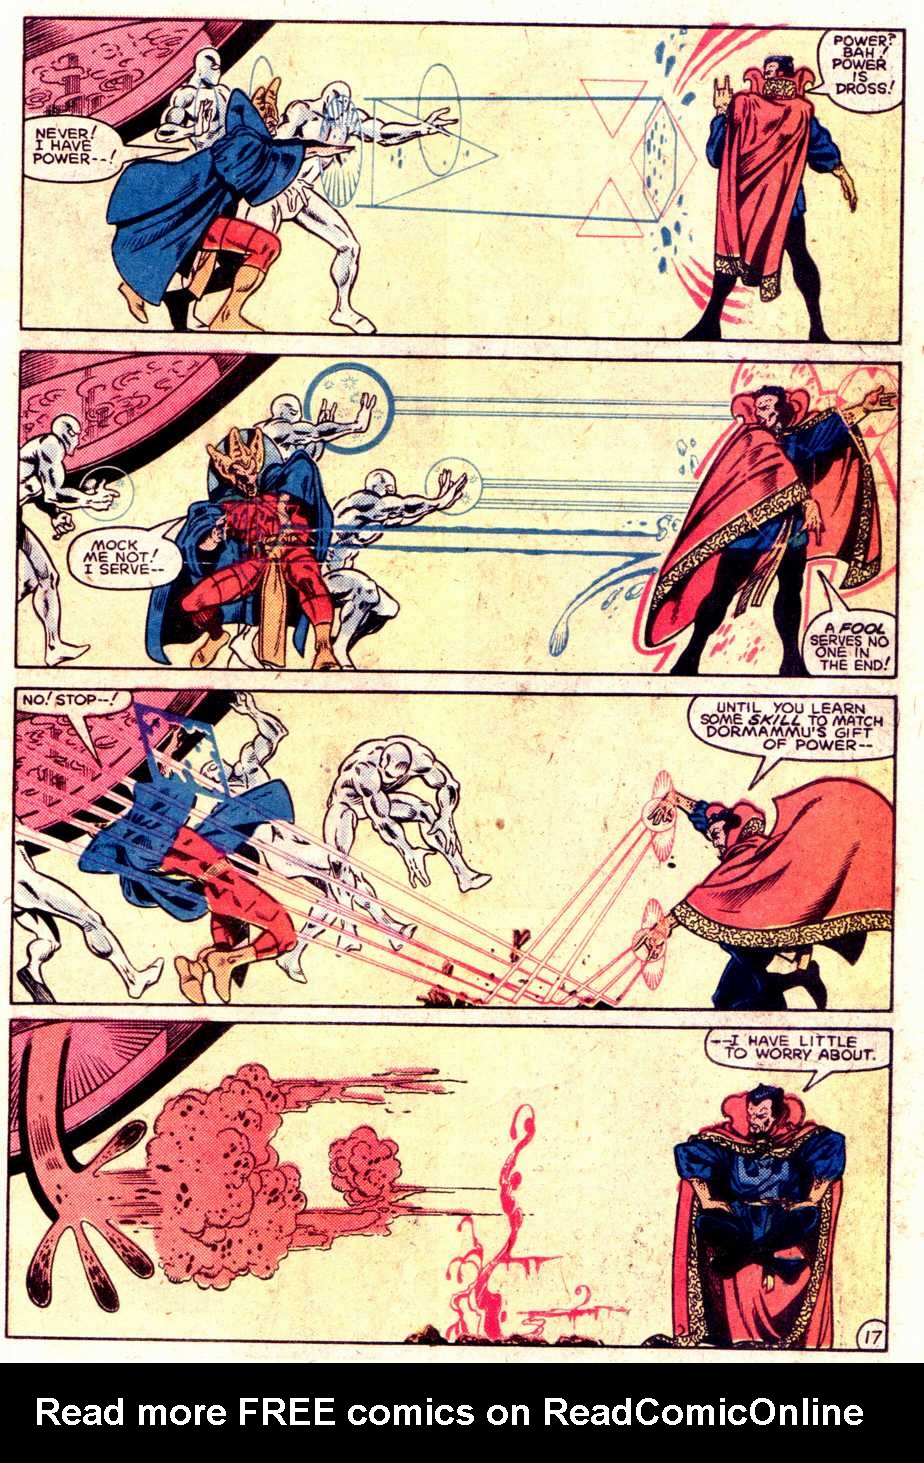 What If? (1977) issue 40 - Dr Strange had not become master of The mystic arts - Page 18